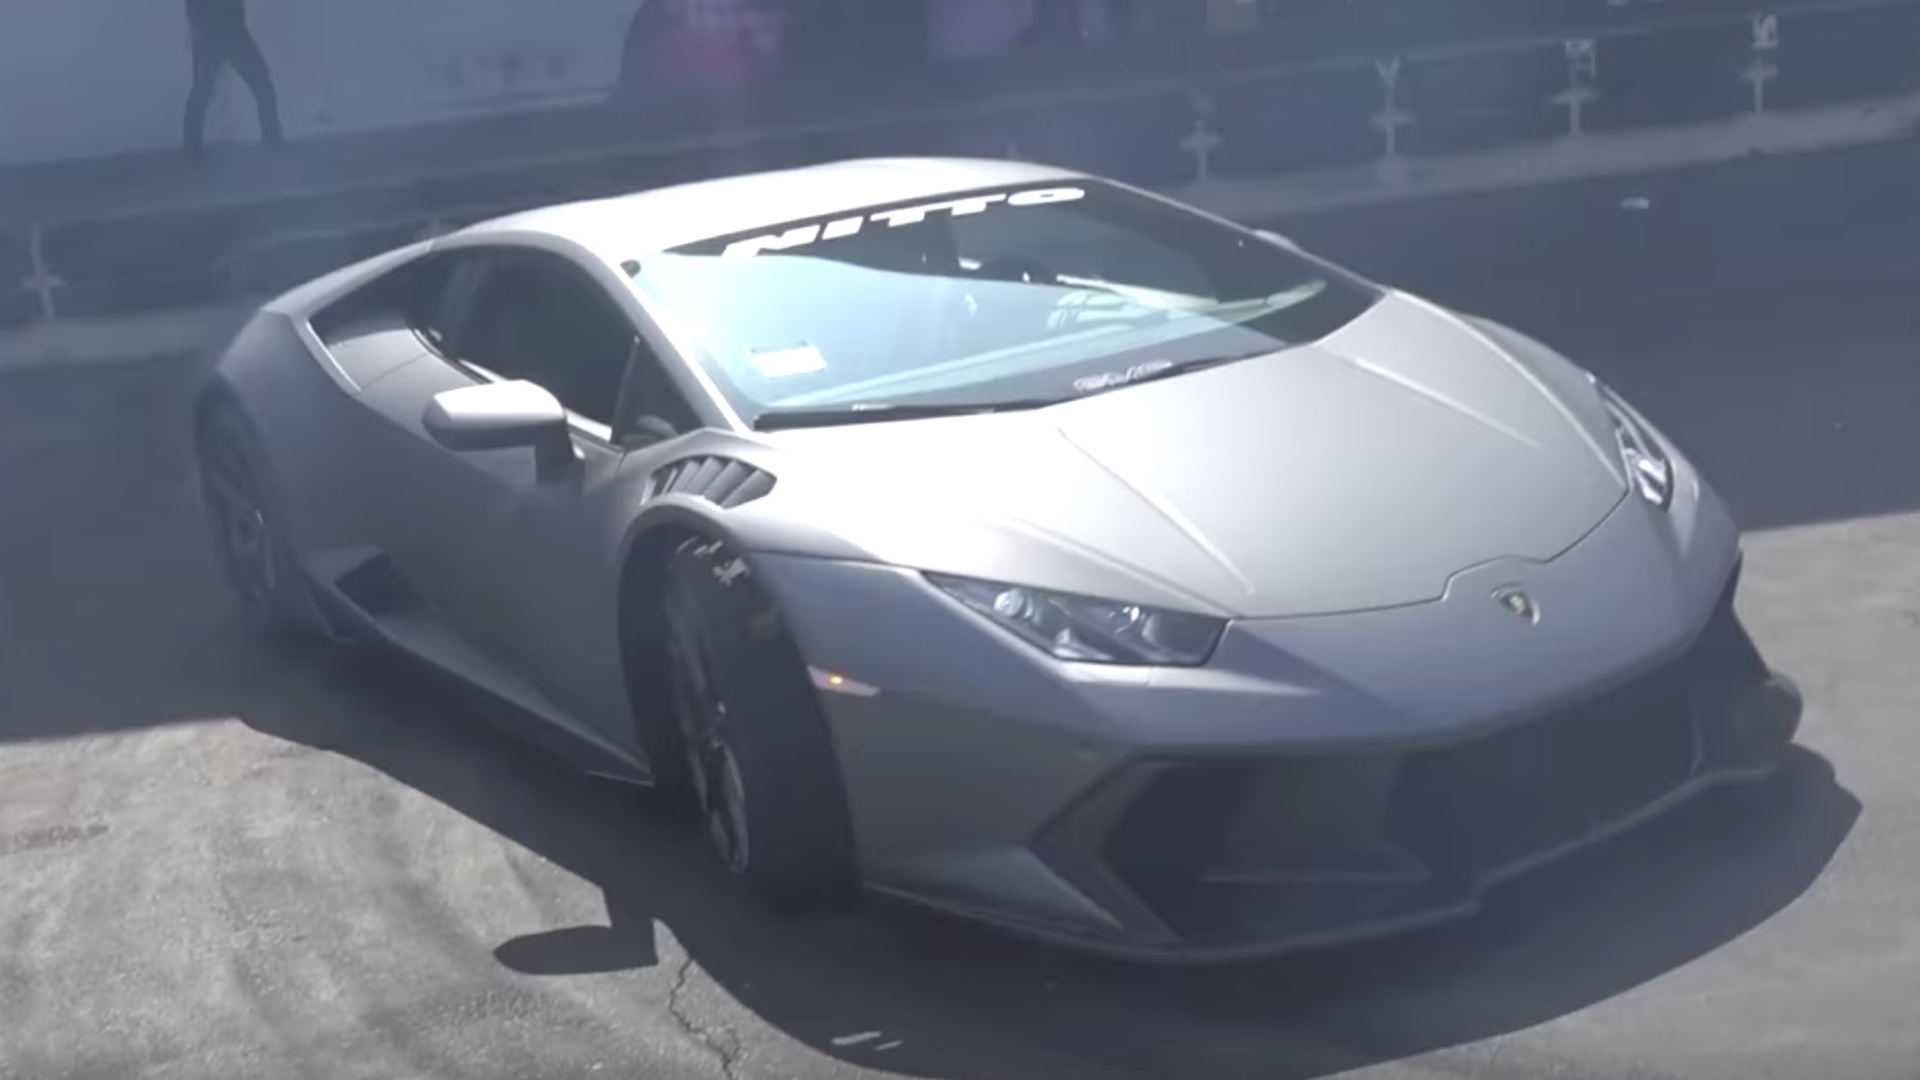 Watch a Lamborghini Huracan Do Donuts in the Hands of a Pro Stunt Driver